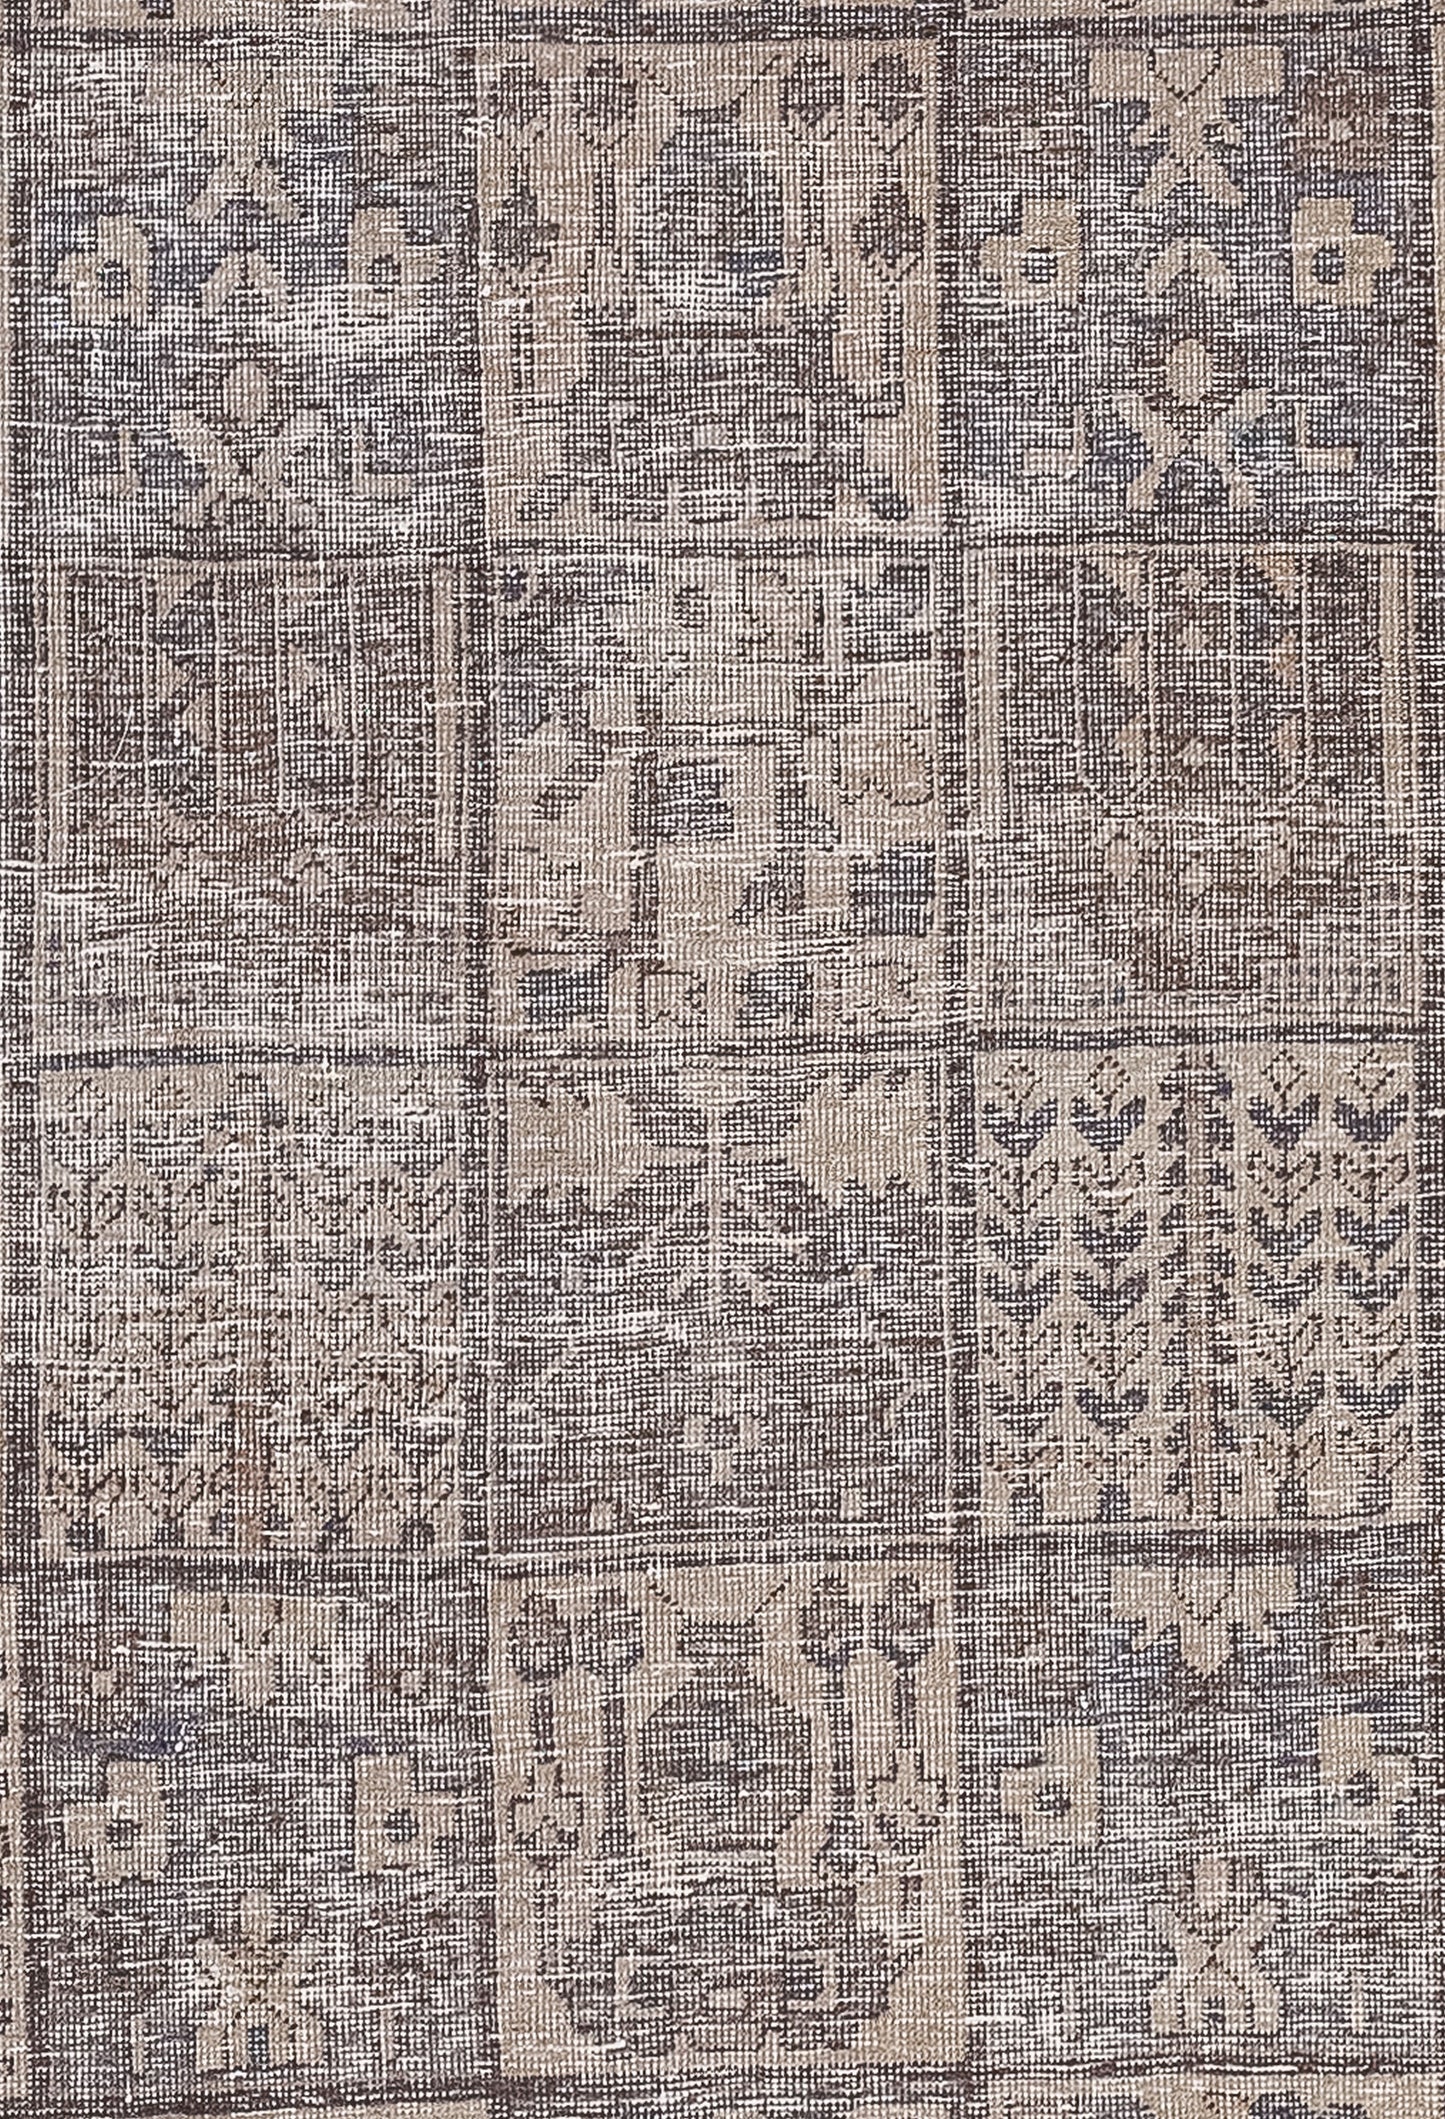 The woven interior of the rug features a grid of 5 x 8 squares with a total of 40 squares, each with an alternate design. Finally, the artwork for the squares are wheat plants, cotton flower heads, arrows, and other abstractions of nature.